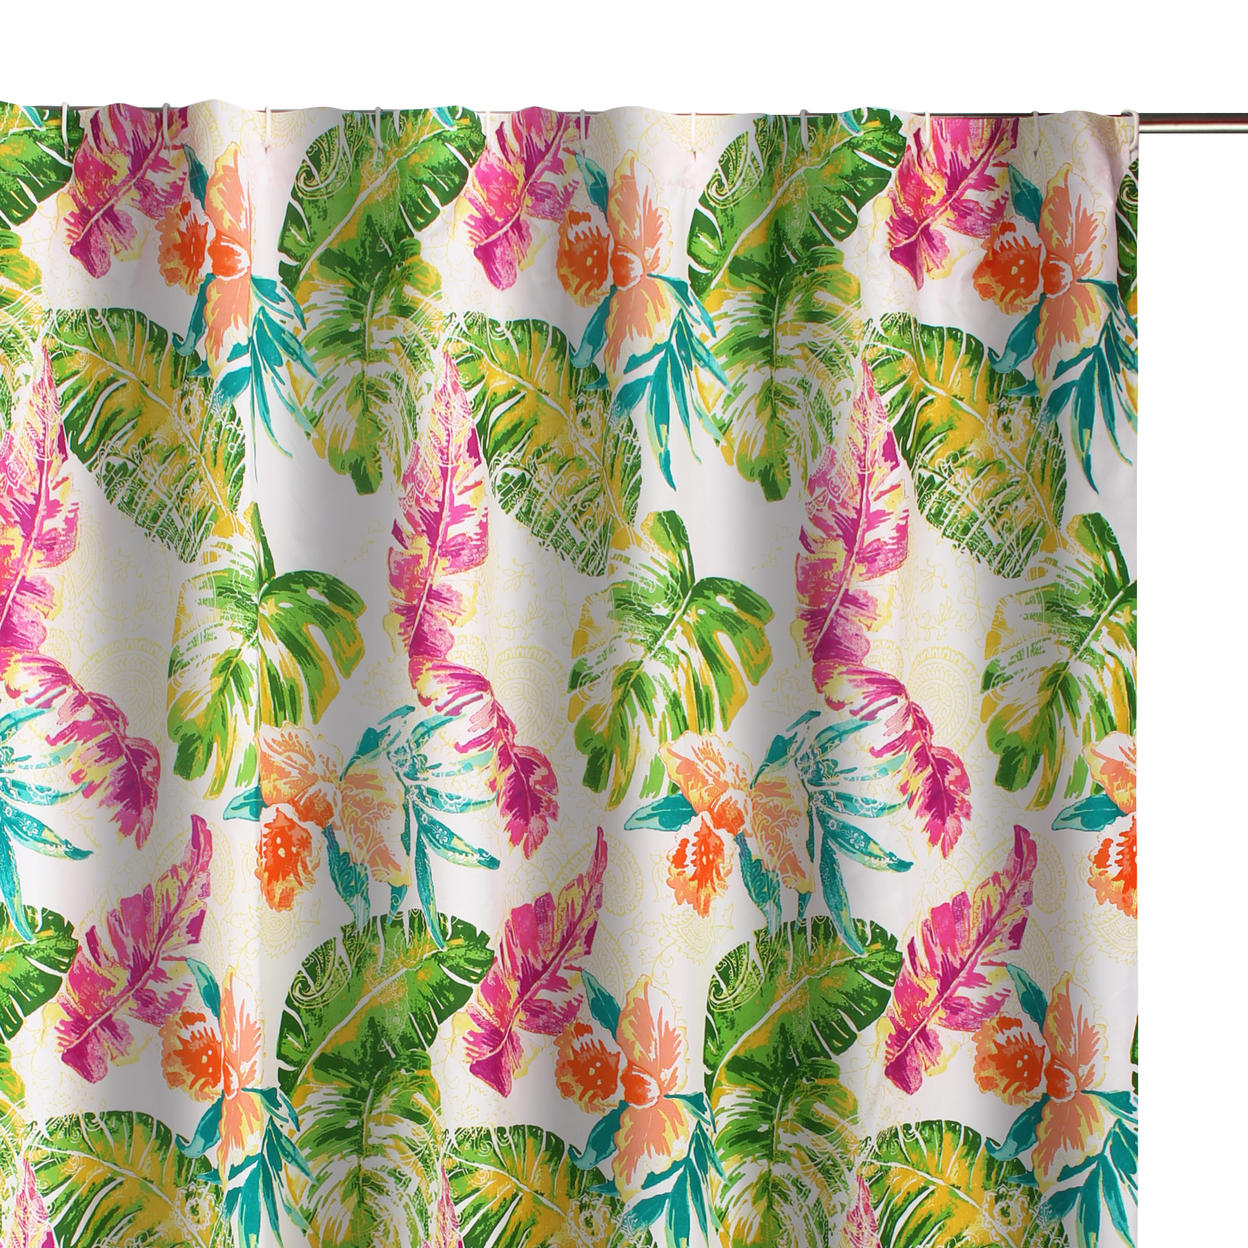 Porto 72 Inch Shower Curtain, Tropical Palm Leaves, Vibrant Blue And Green